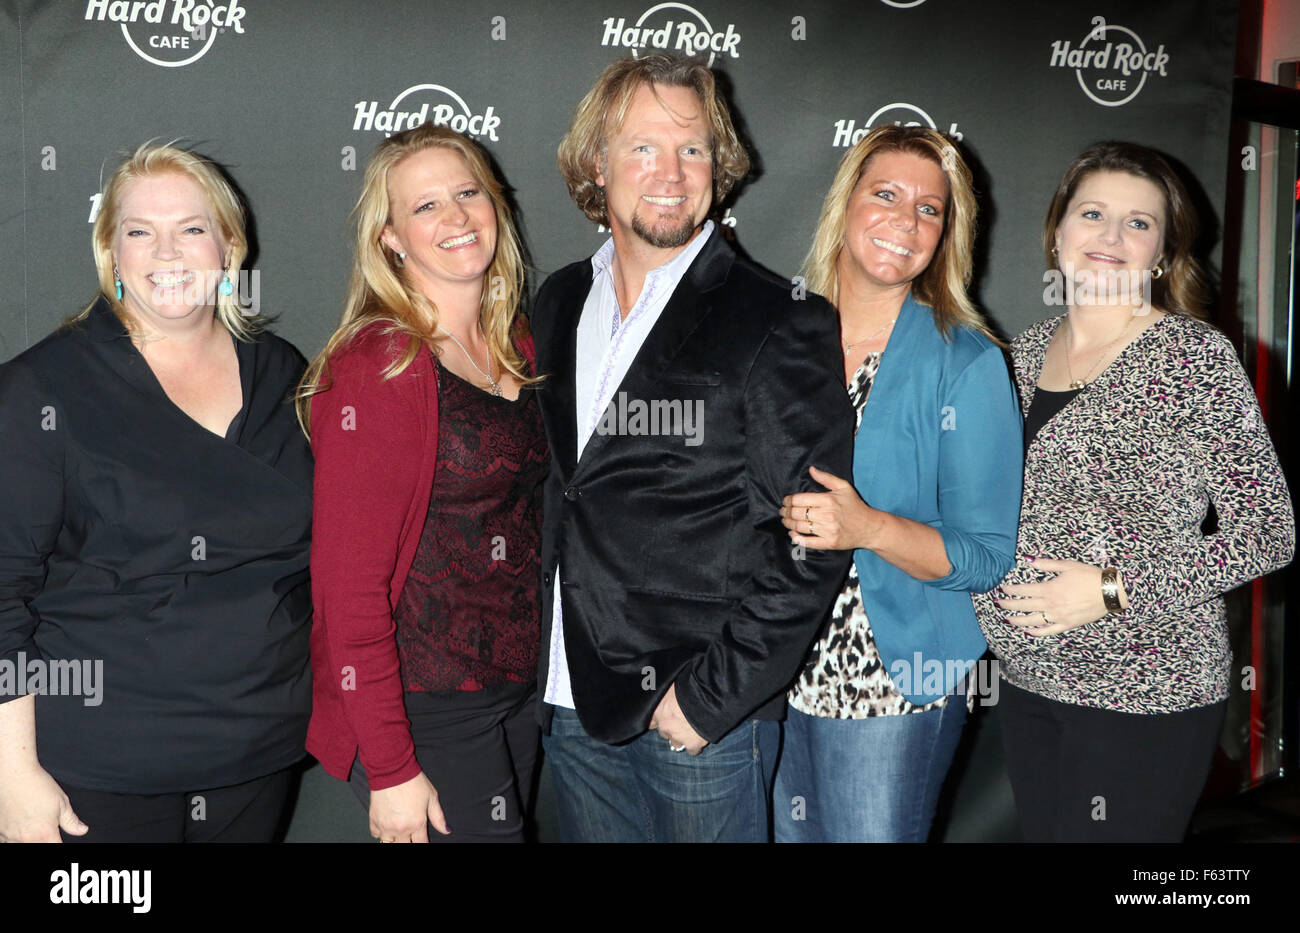 Hard Rock Cafe Las Vegas 25th Anniversary Celebration  Featuring: Janelle, Christine, Kody Brown, Meri, Robyn, Sister Wives Where: Las Vegas, Nevada, United States When: 10 Oct 2015 Stock Photo